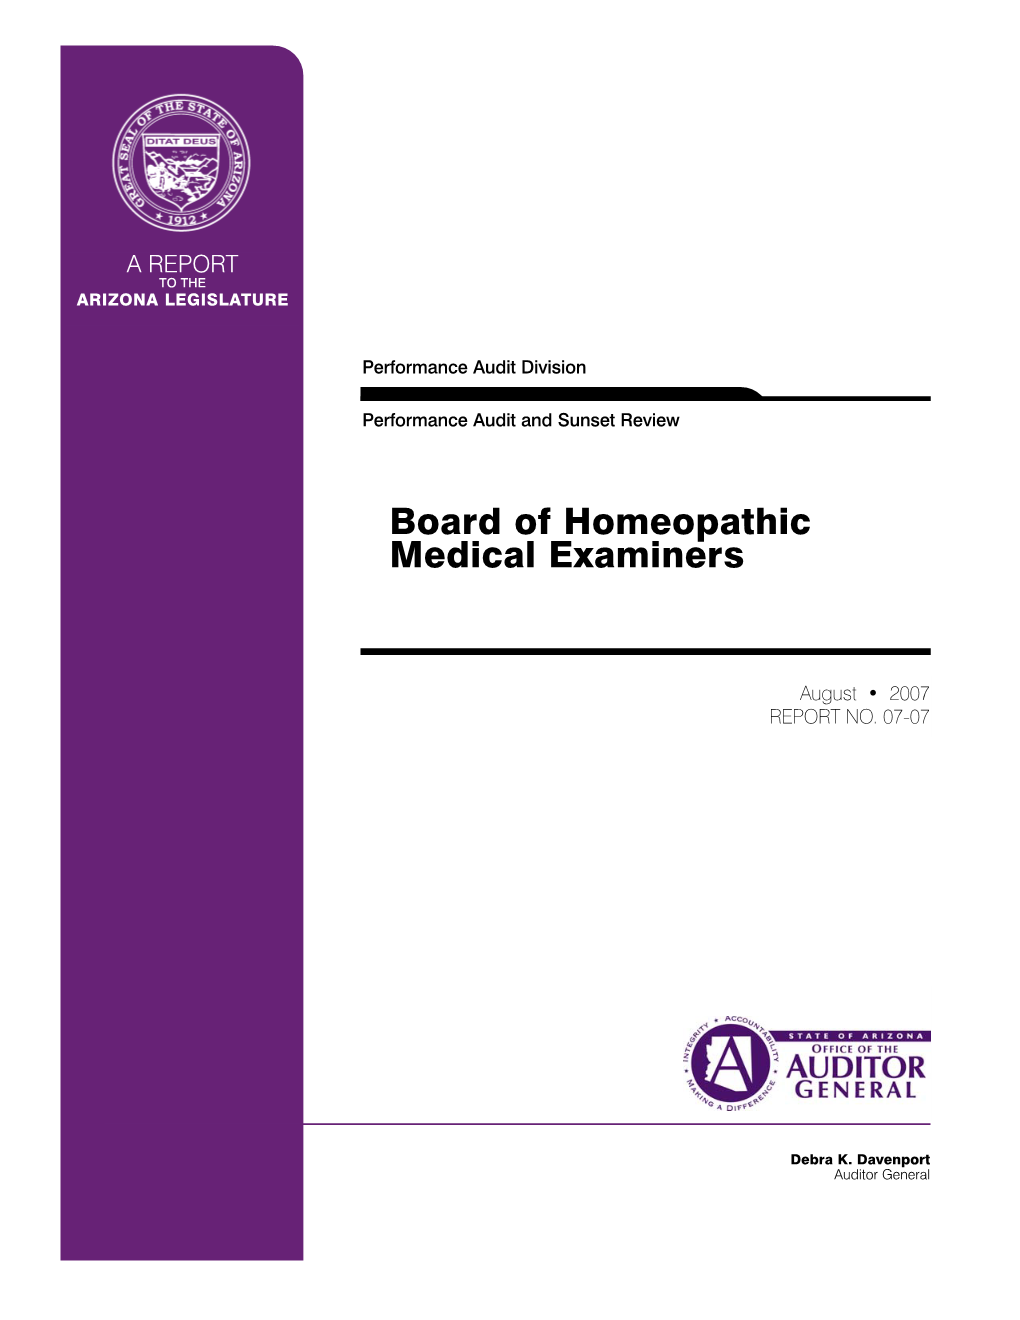 Board of Homeopathic Medical Examiners